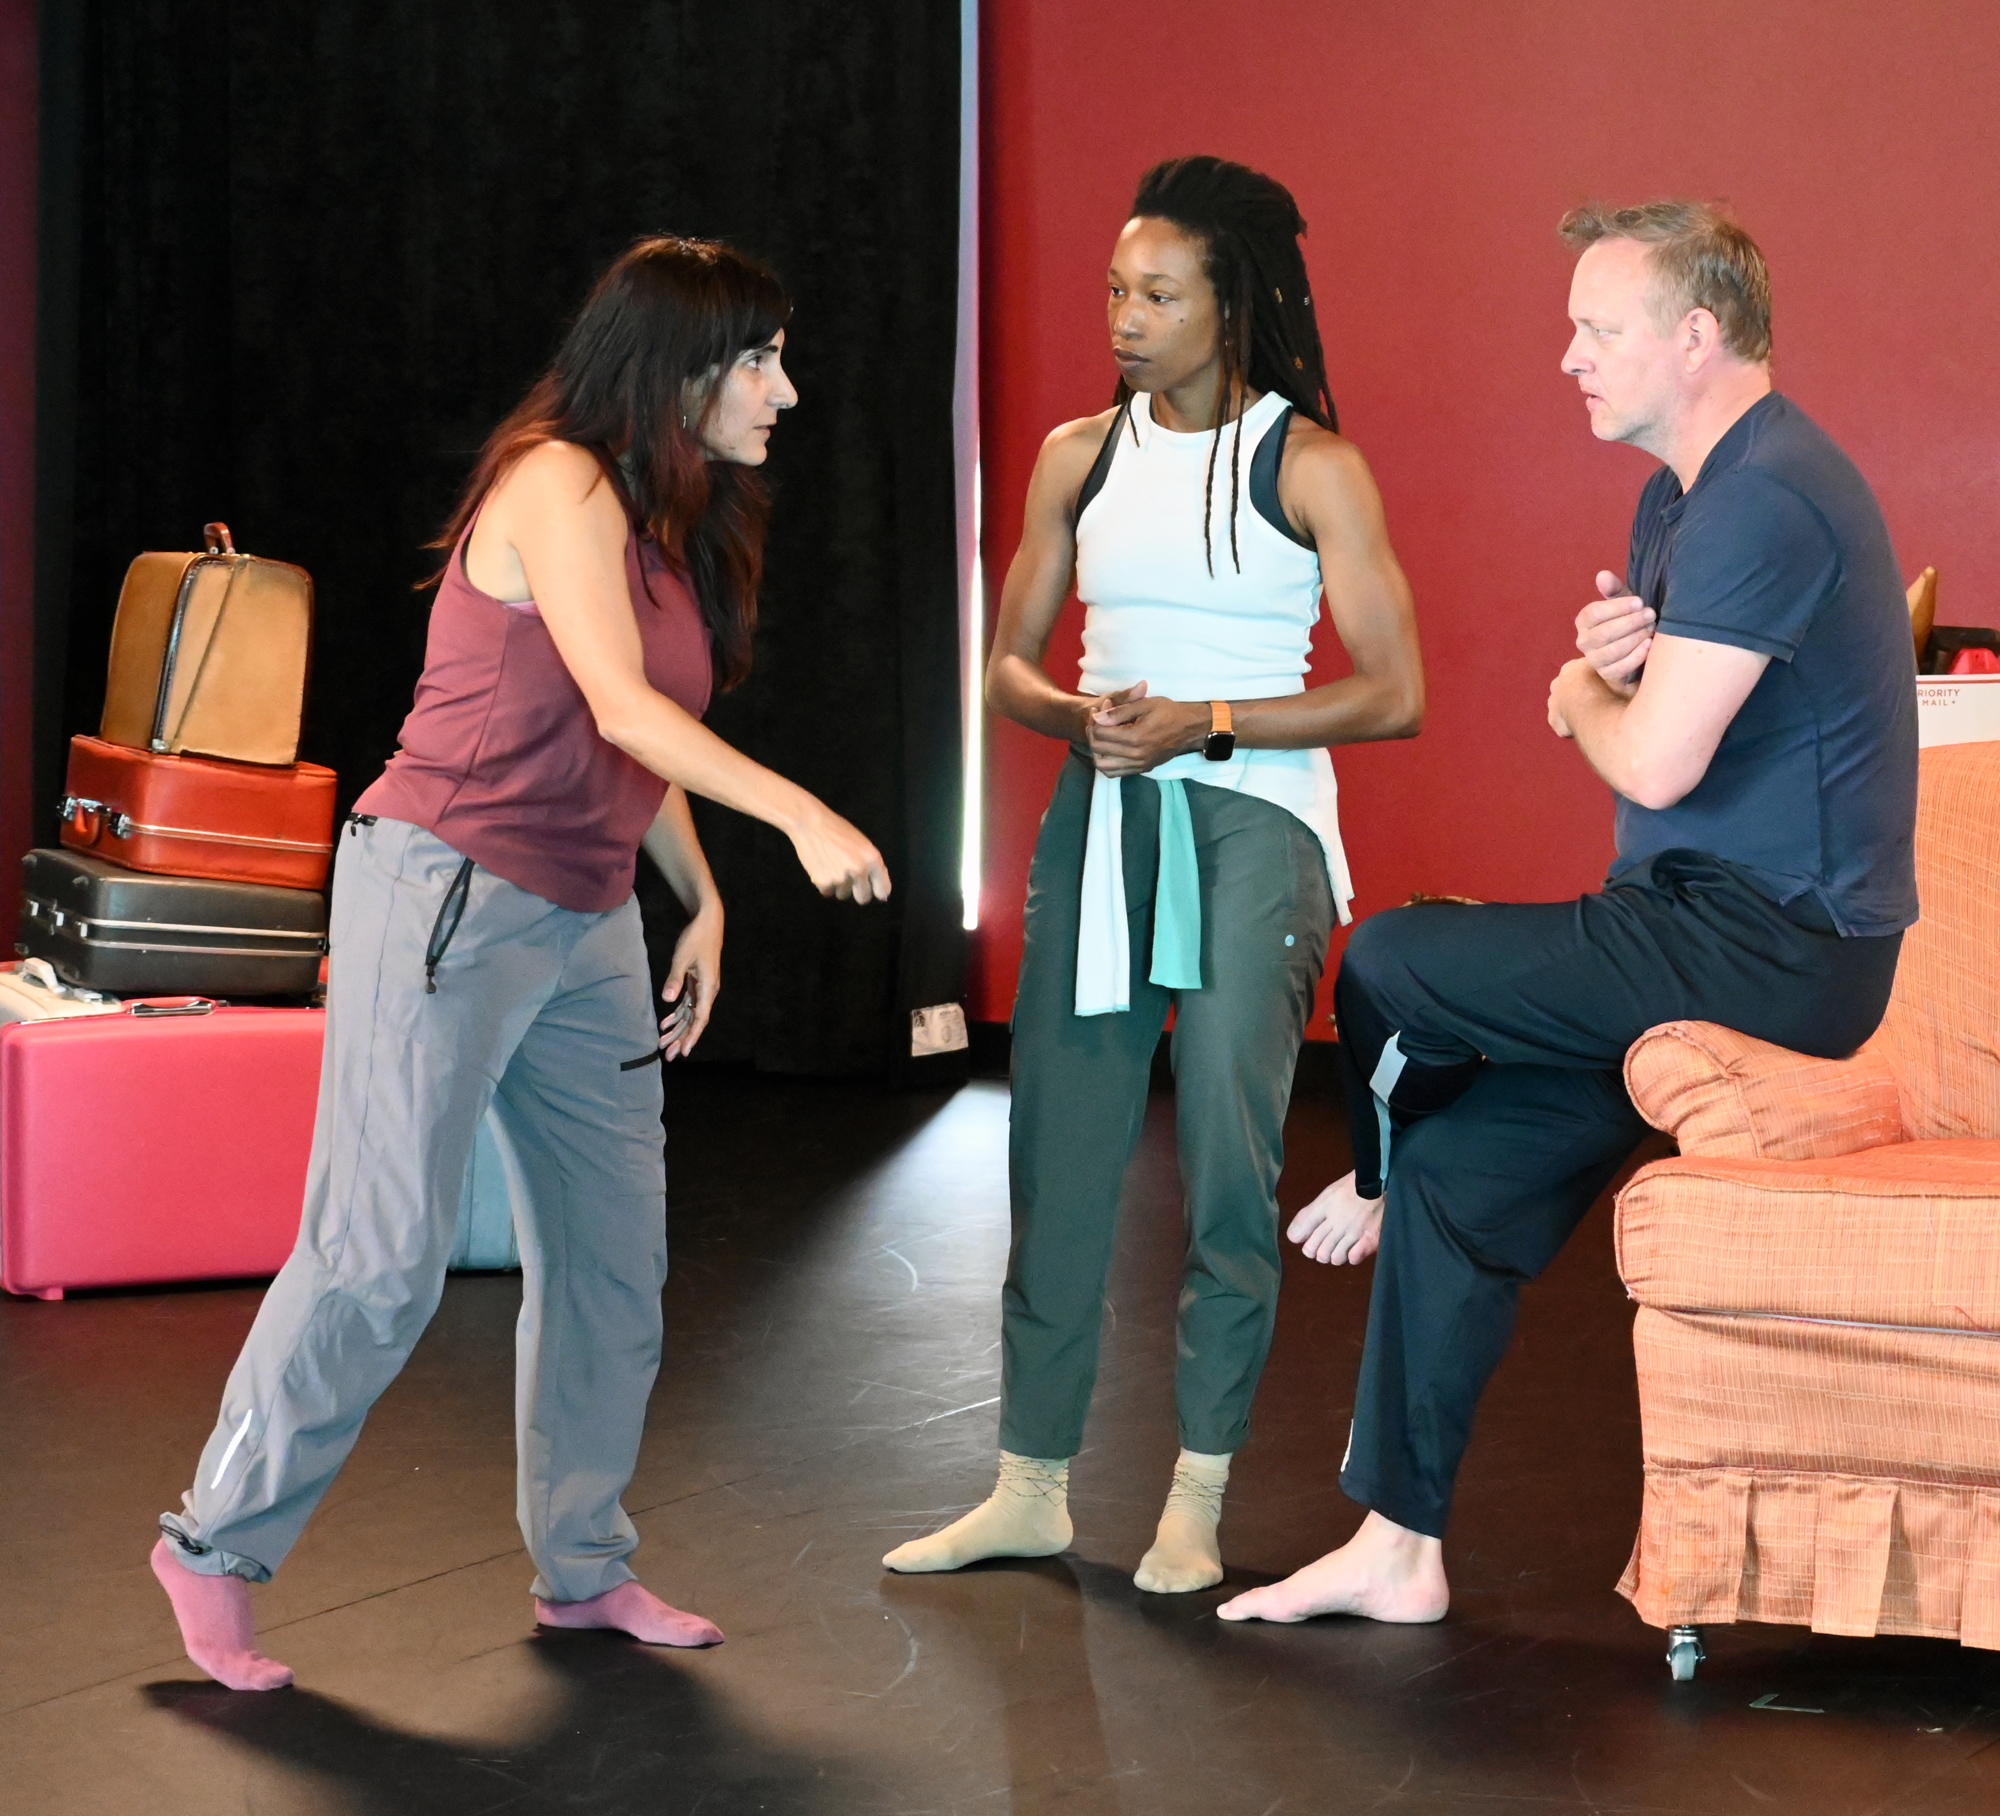 Leymis Bolaños Wilmott instructs dancers Michael Foley and Monessa Salley at rehearsal.